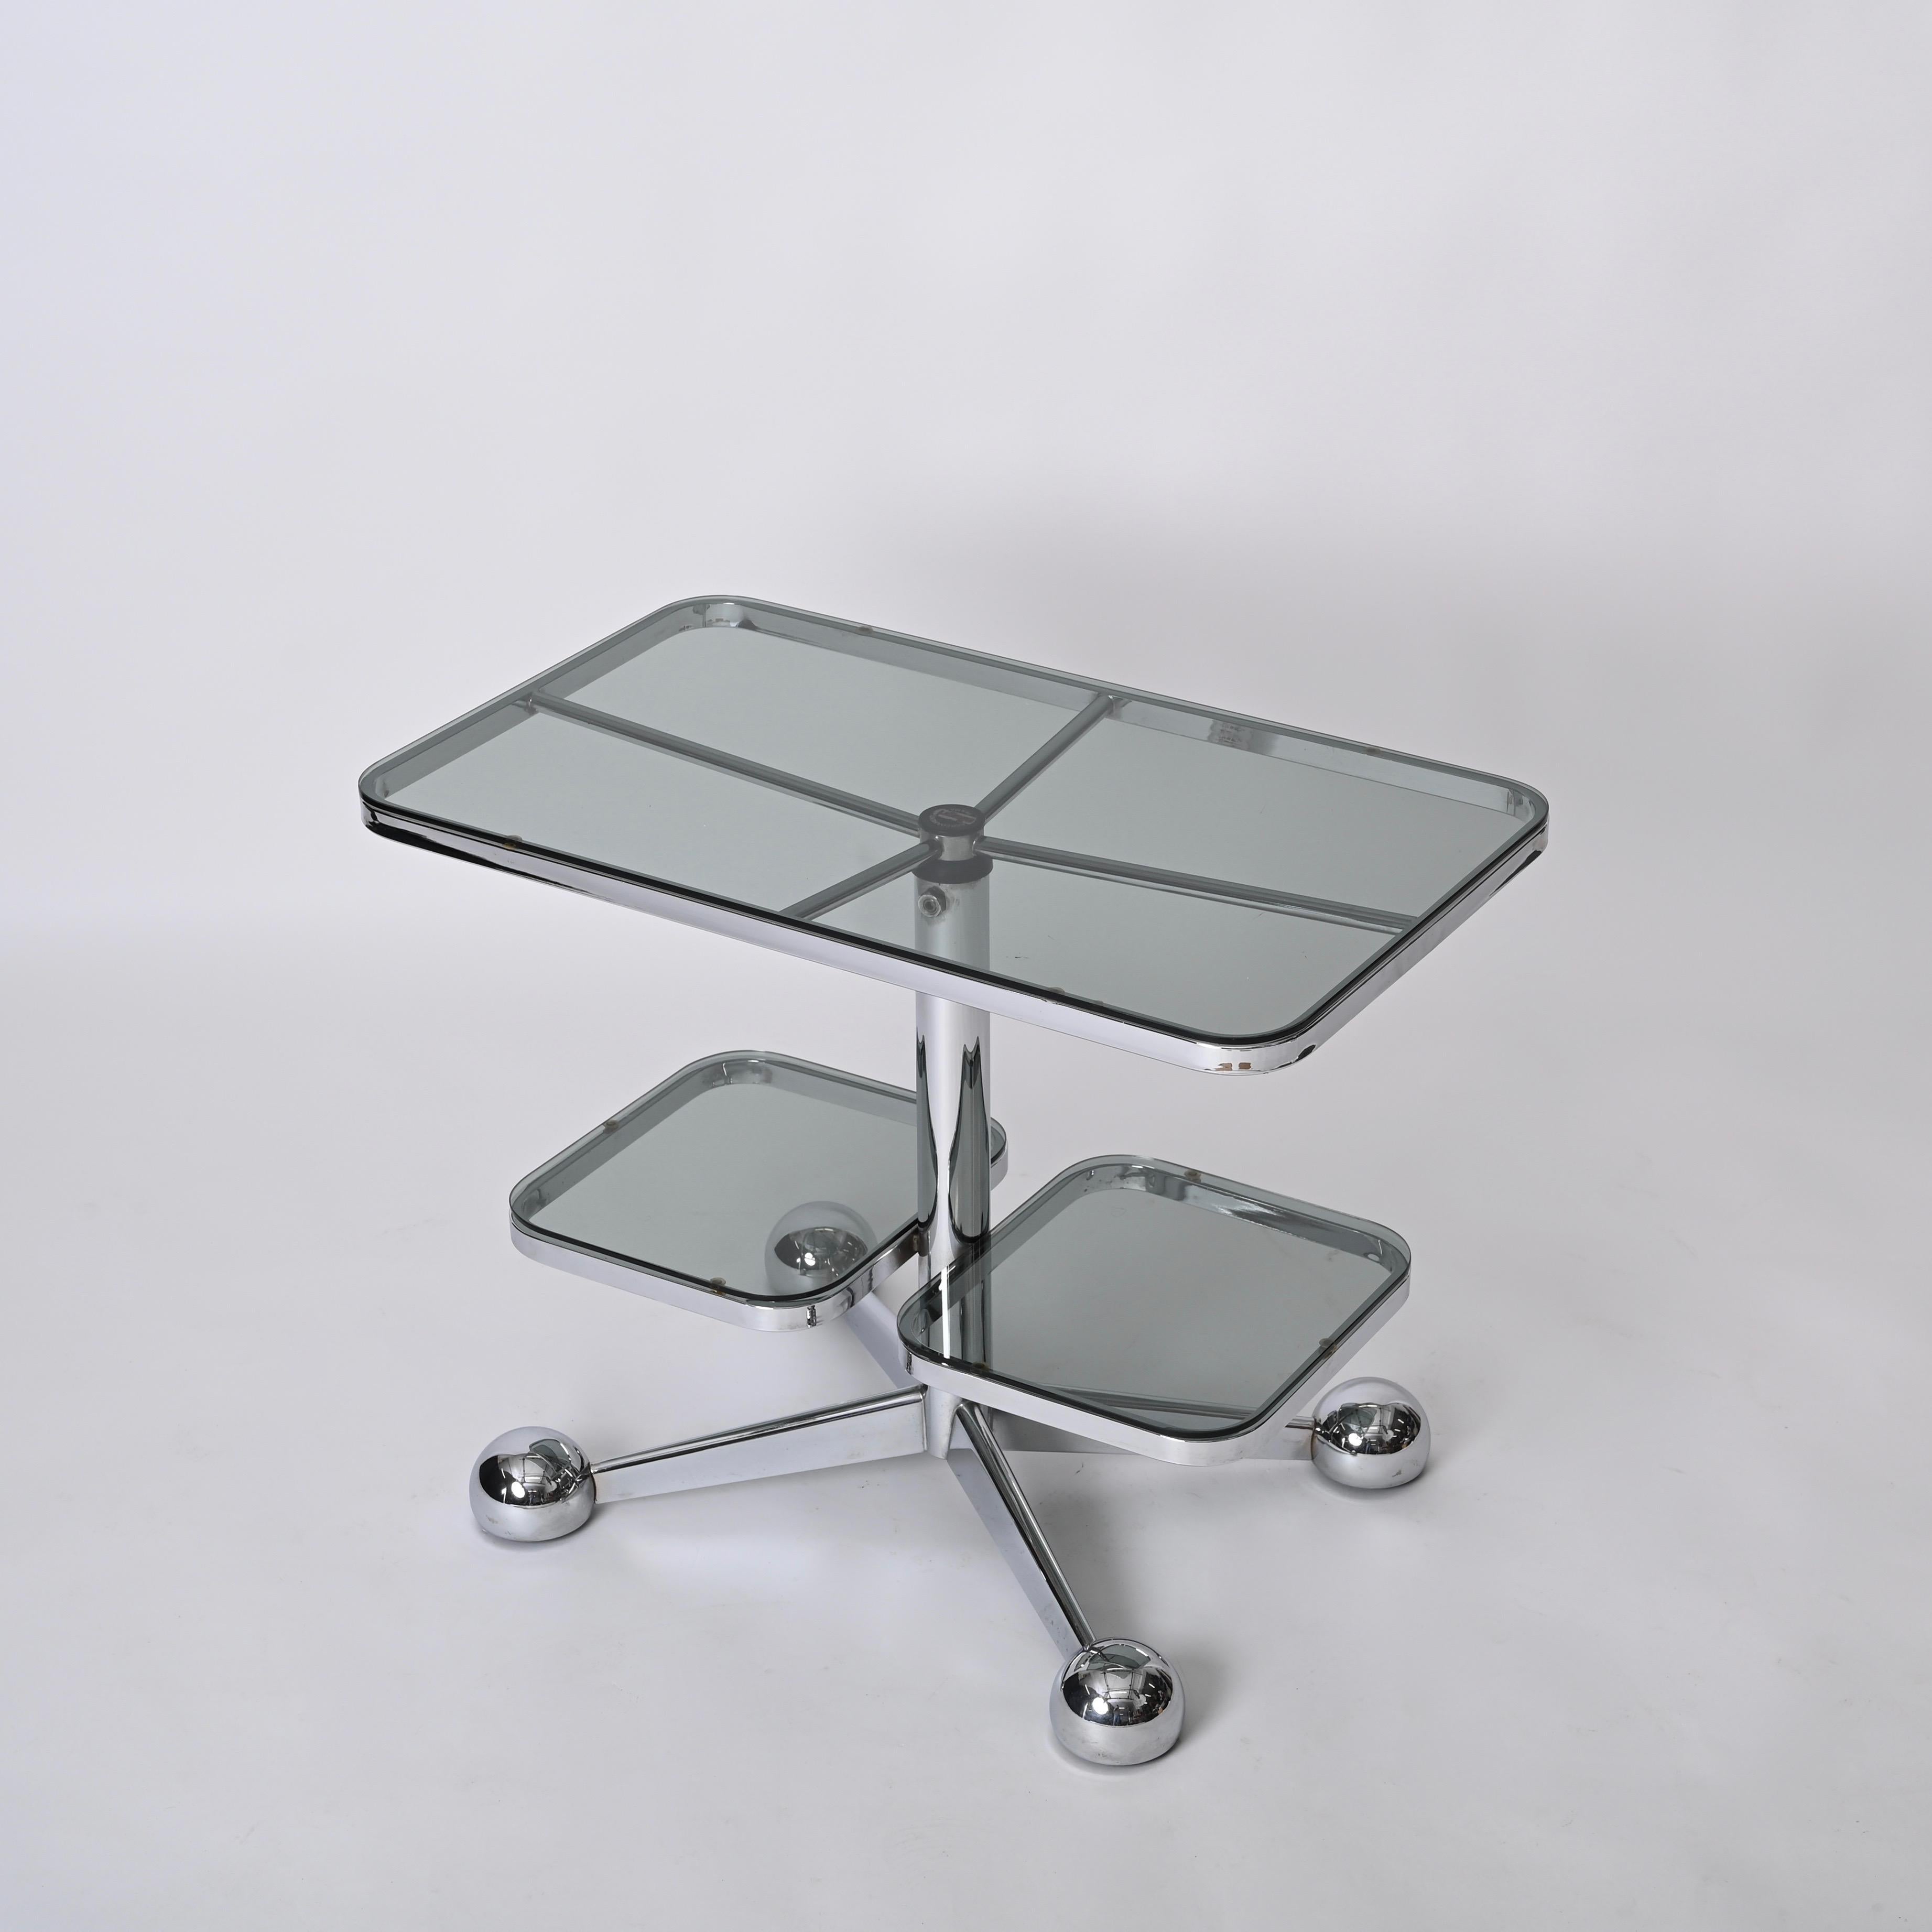 Mid-Century Modern Chrome Bar Cart or Side Coffee Table by Allegri Arredamenti, Italy 1970s For Sale